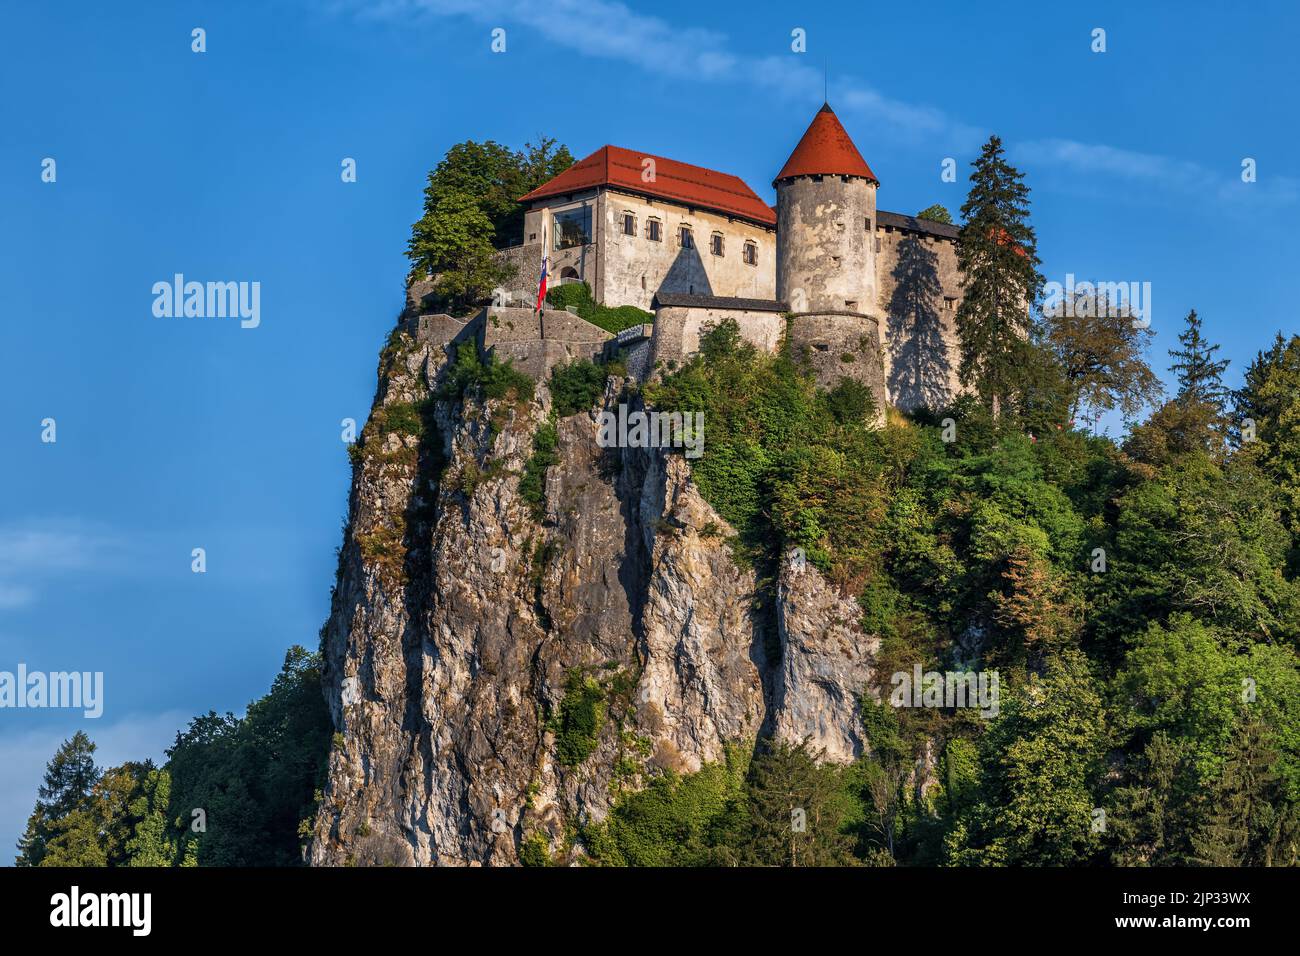 Bled Castle in Slovenia, medieval fortress perched on a cliff top in the Julian Alps, northwestern region. Stock Photo